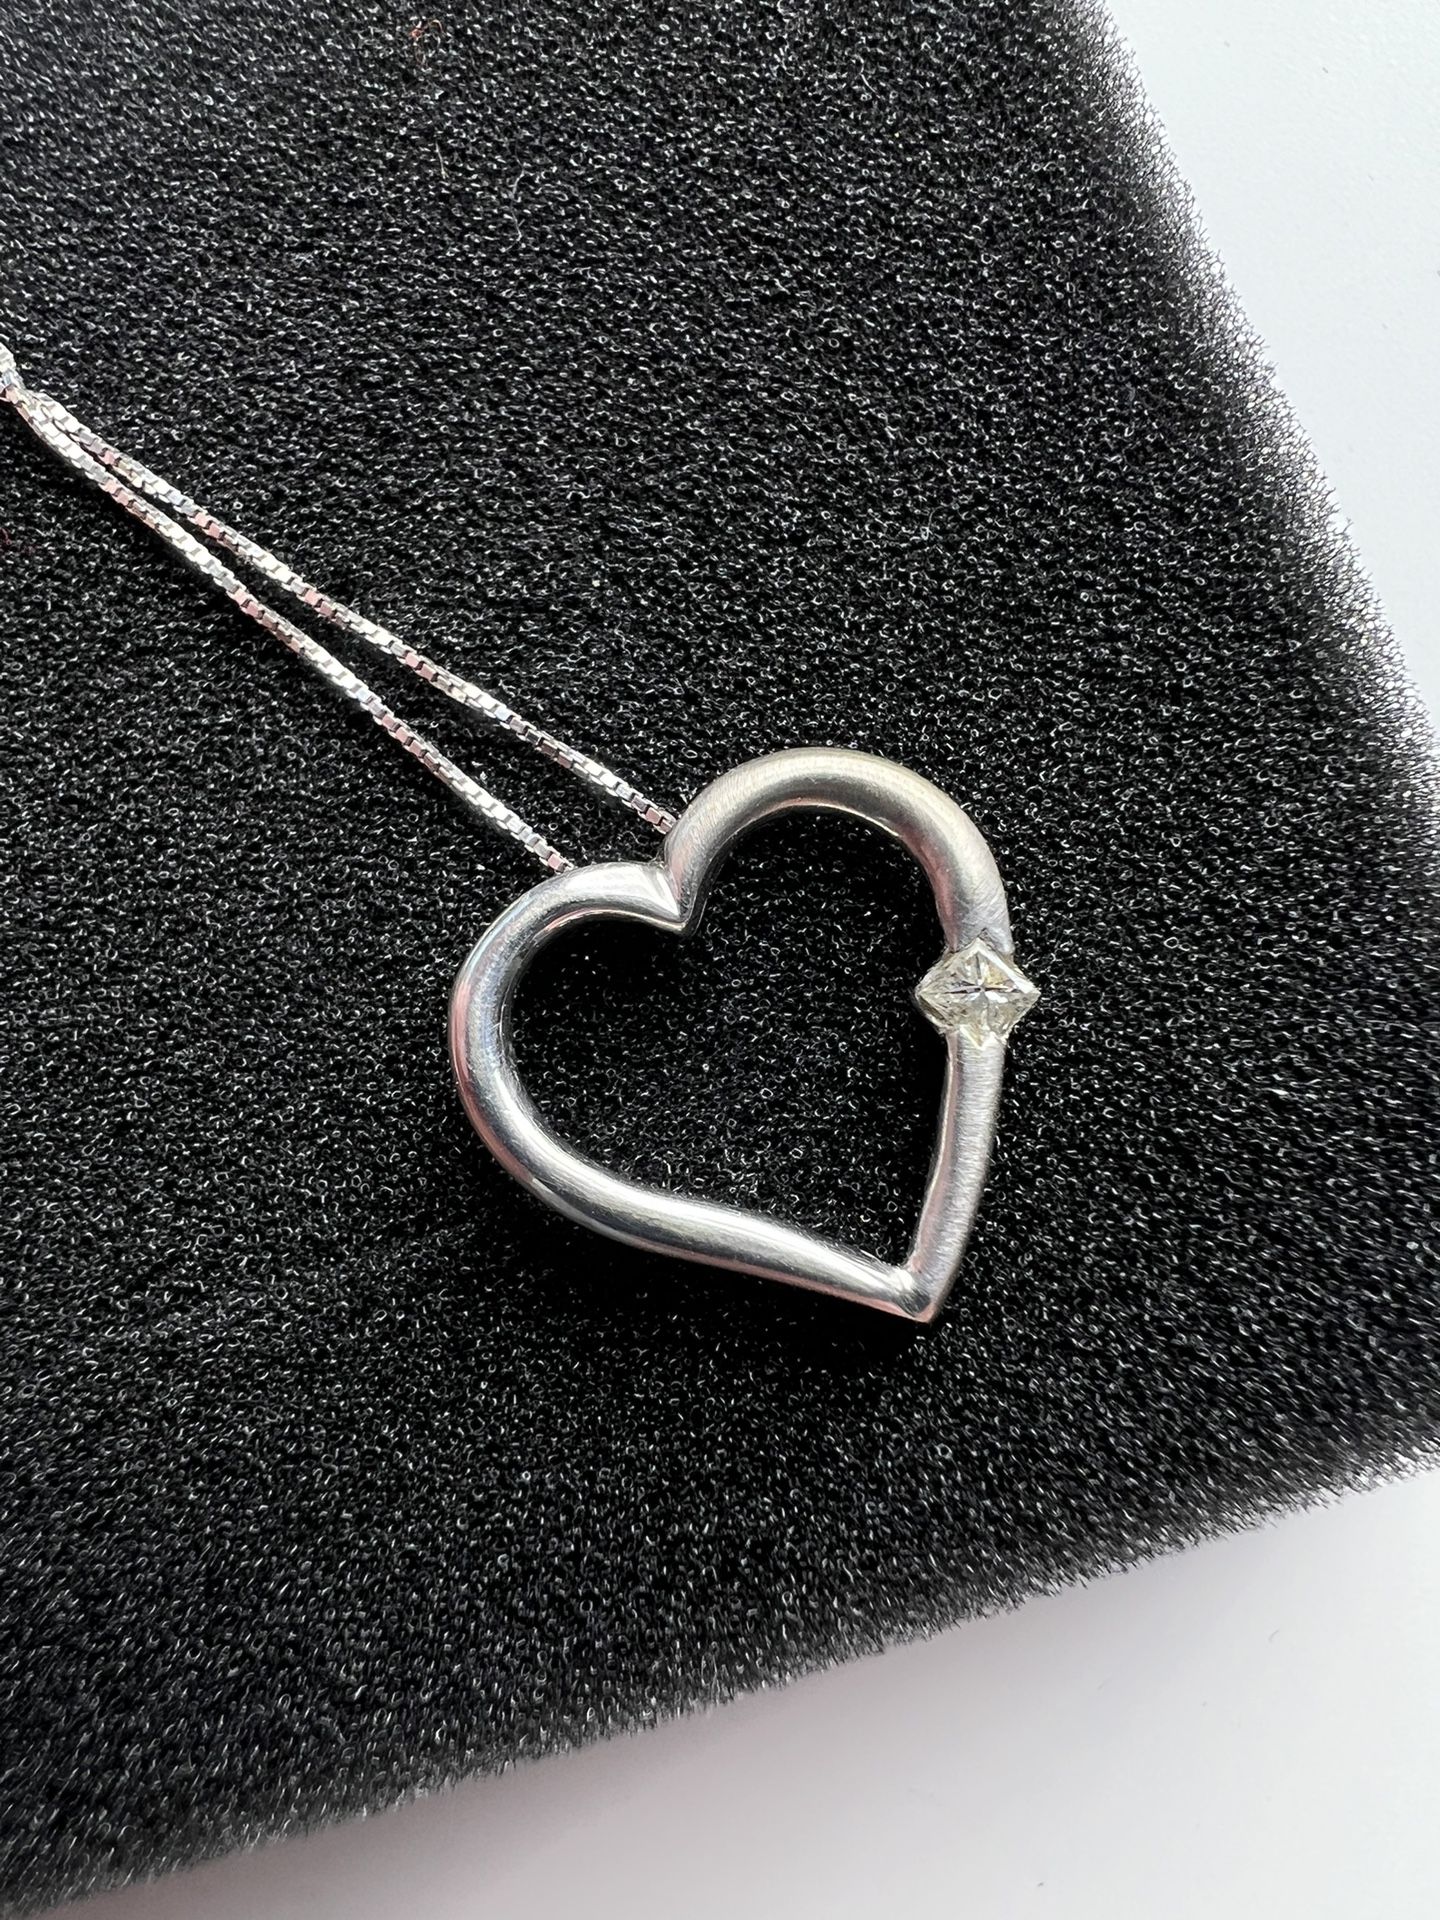 14k White Gold Heart Necklace With Sapphire Accent 